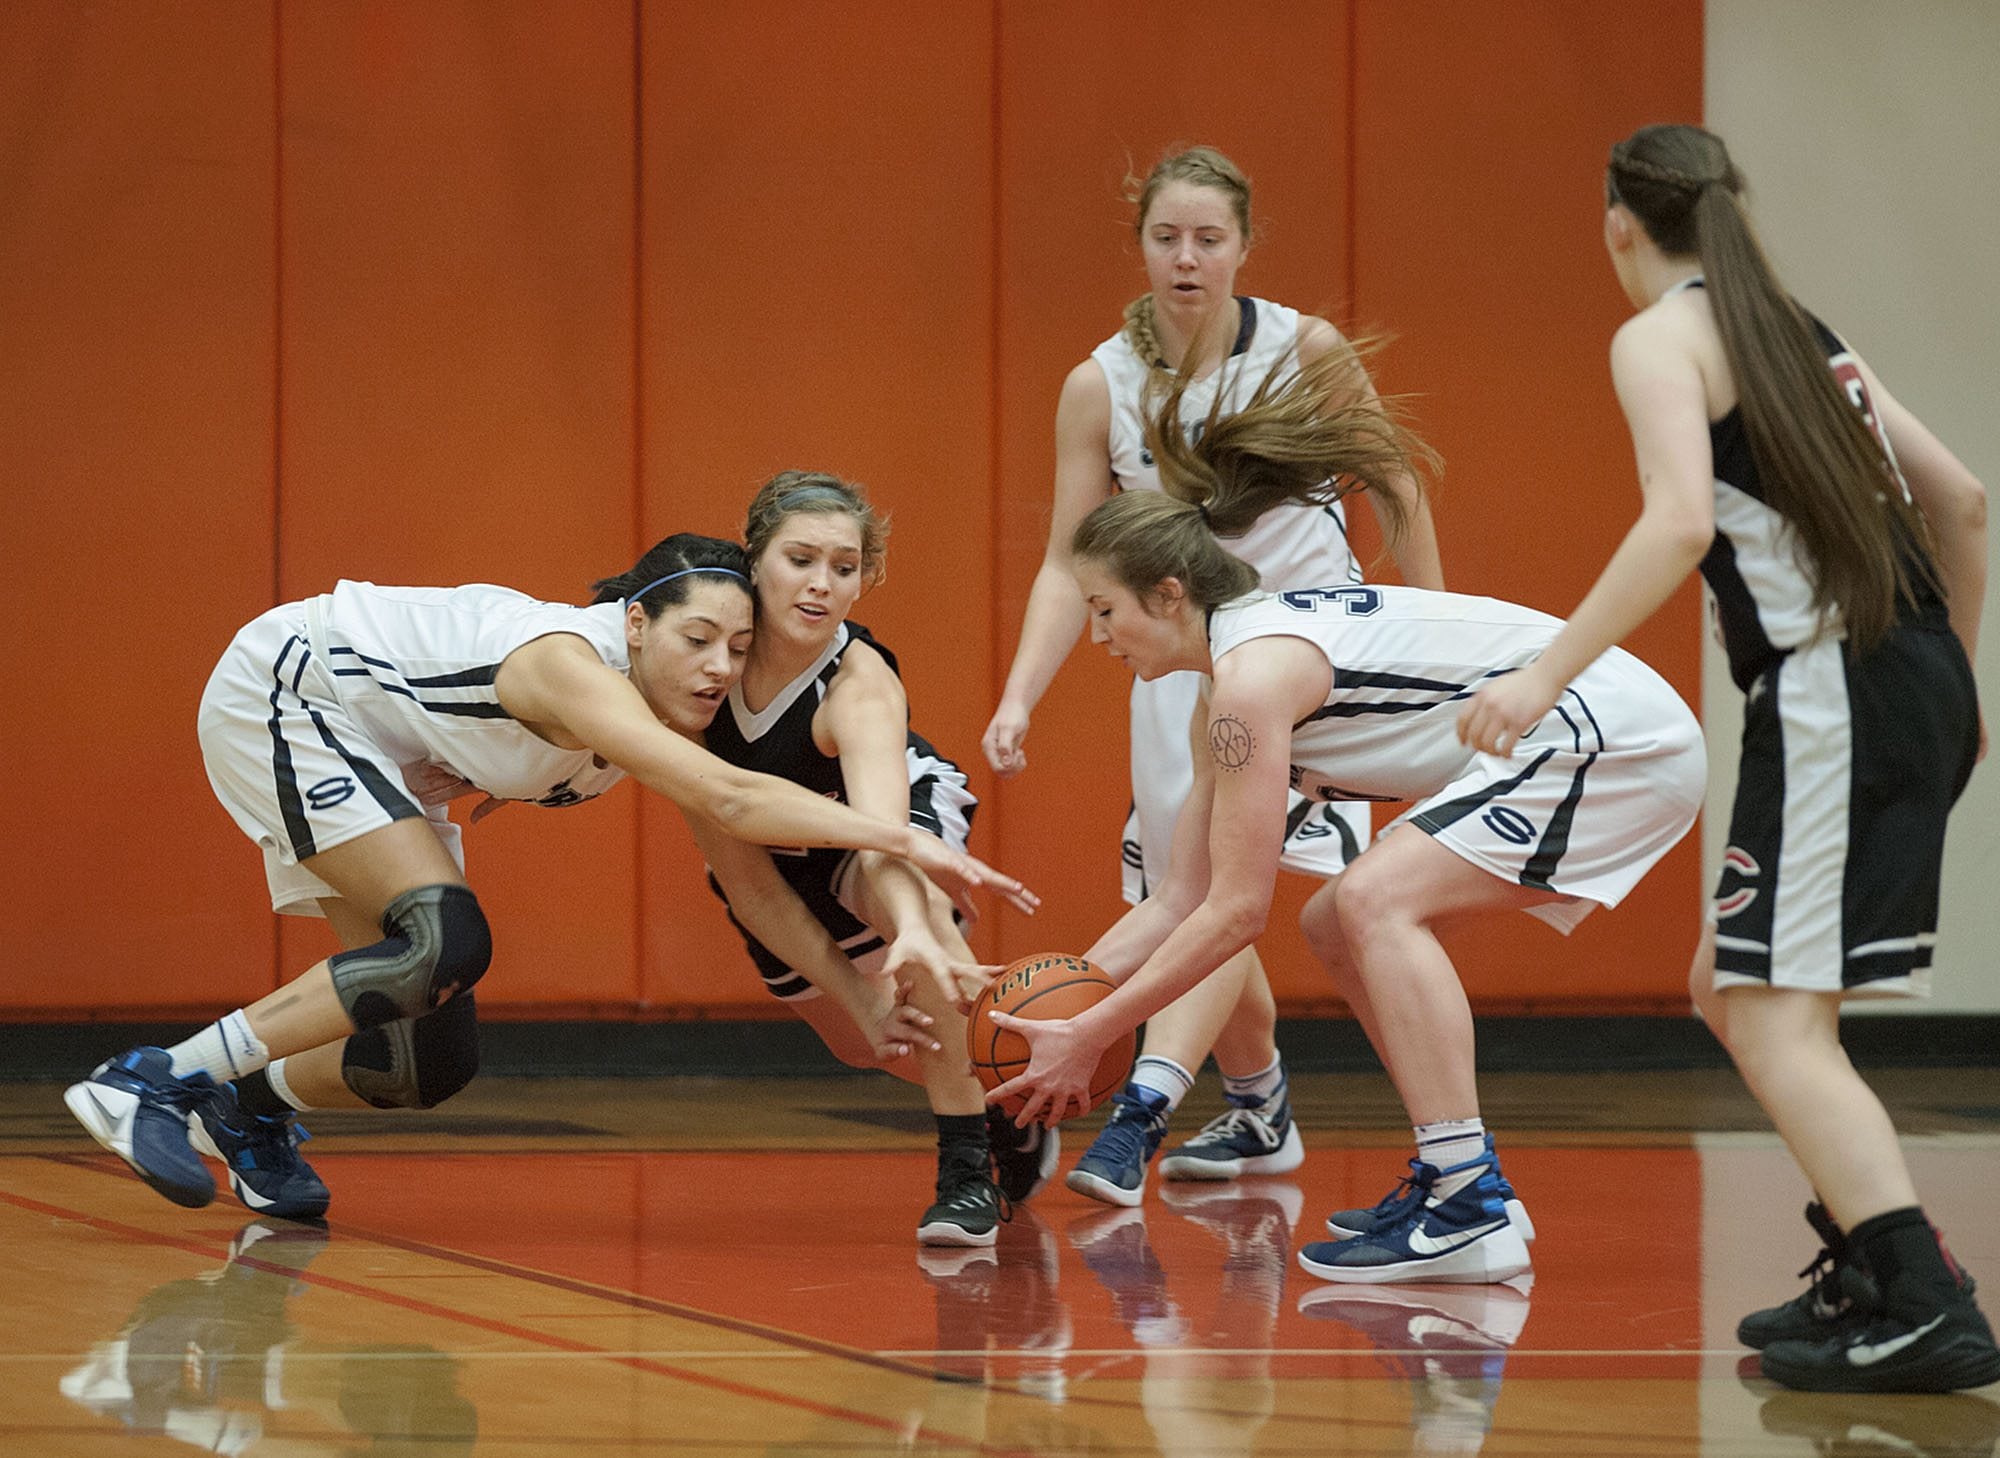 Skyview's Maddie Lord (32) from left, Camas'Meghan Finley (2) and Skyview's Ashlee Comastro (30) battle for a loose ball in the first quarter Tuesday evening, Feb. 16, 2016 at Battle Ground High School.